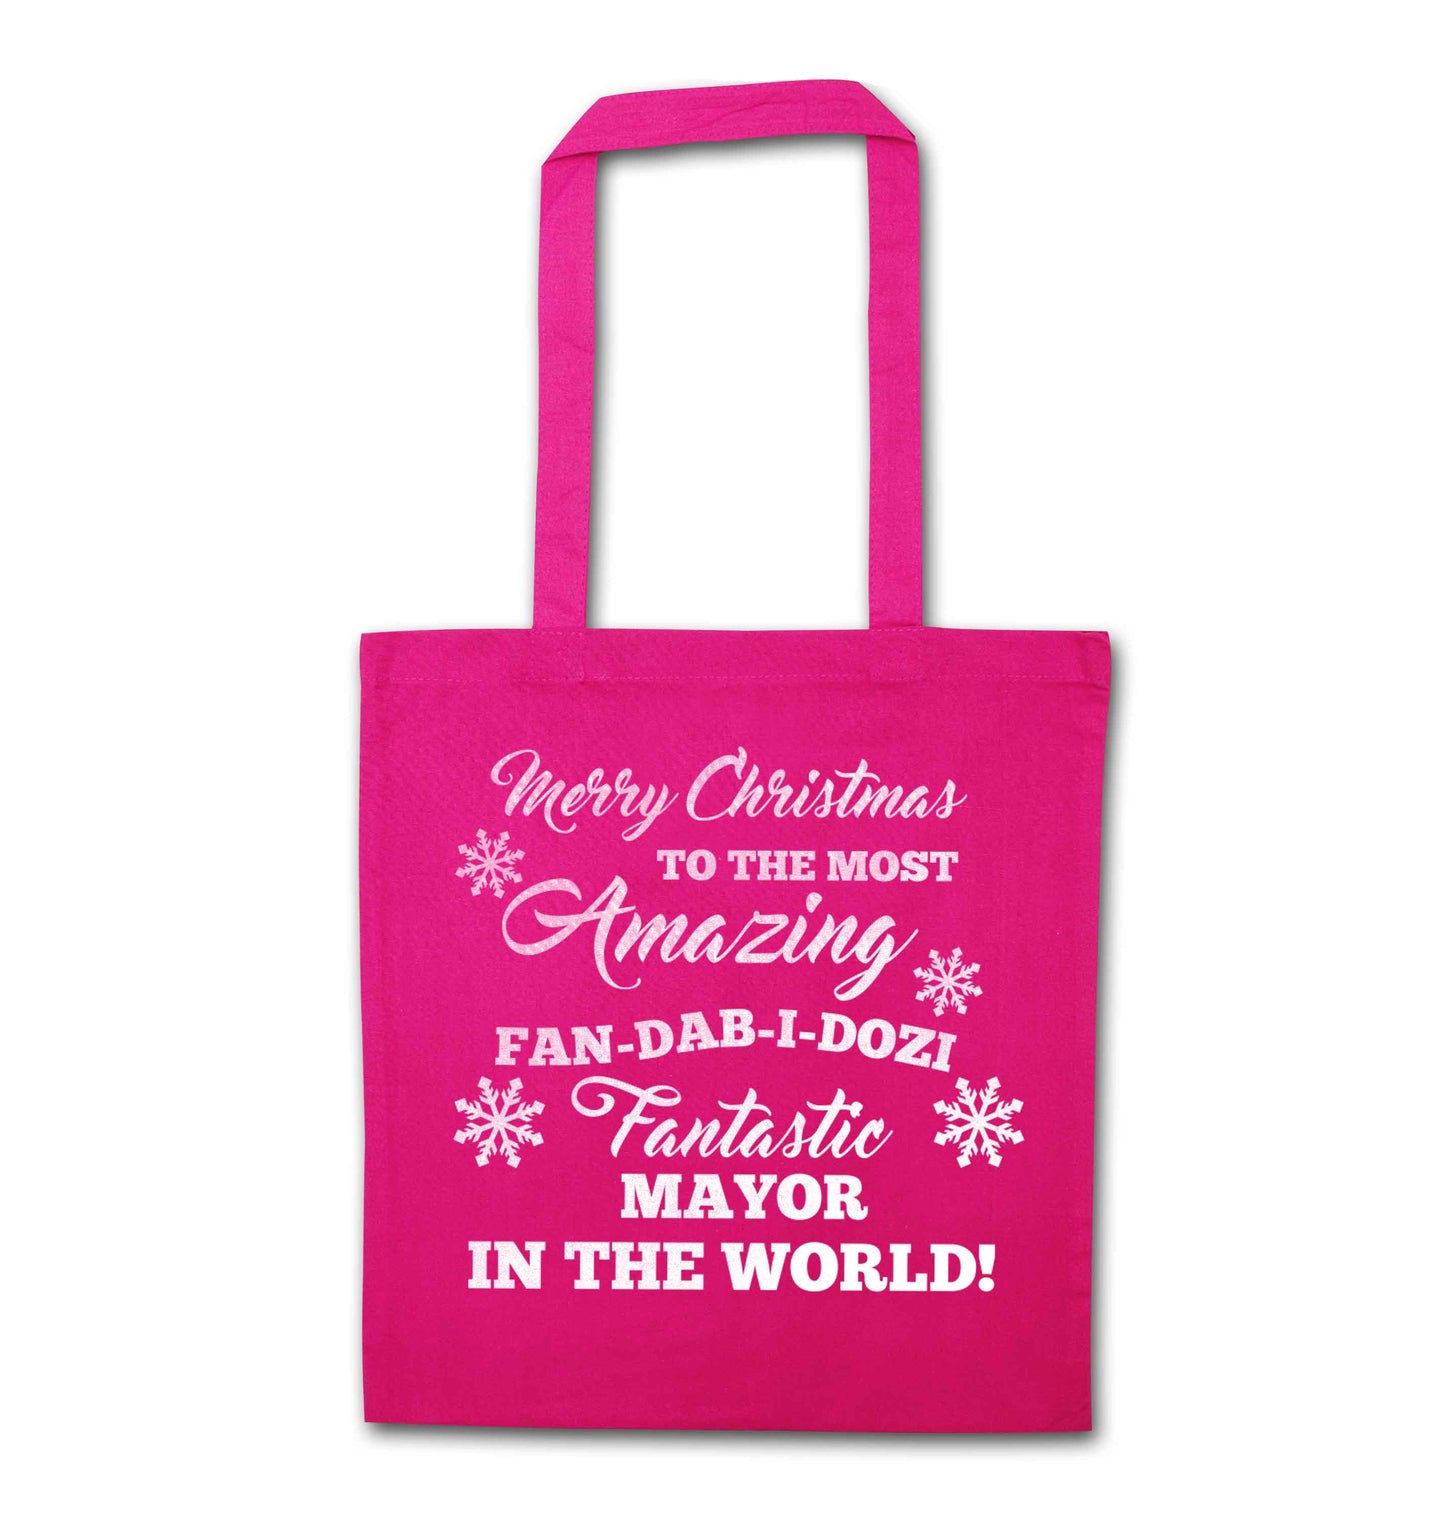 Merry Christmas to the most amazing fireman in the world! pink tote bag